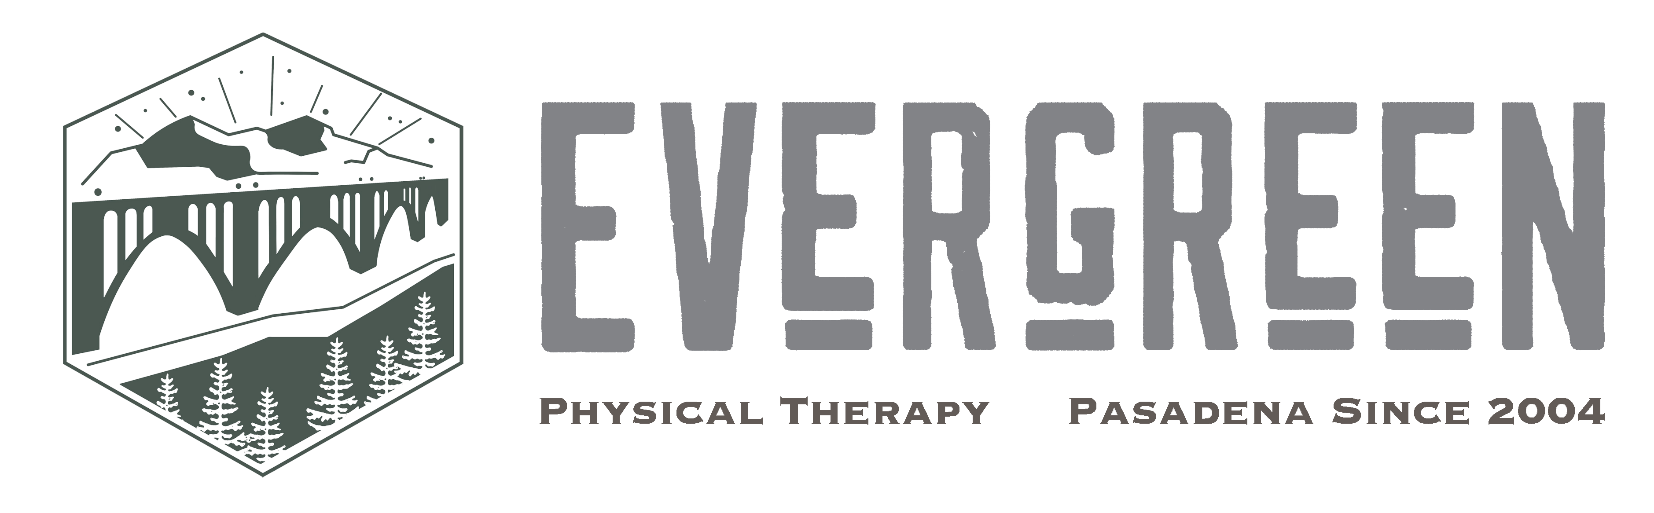 Evergreen Physical Therapy Specialists